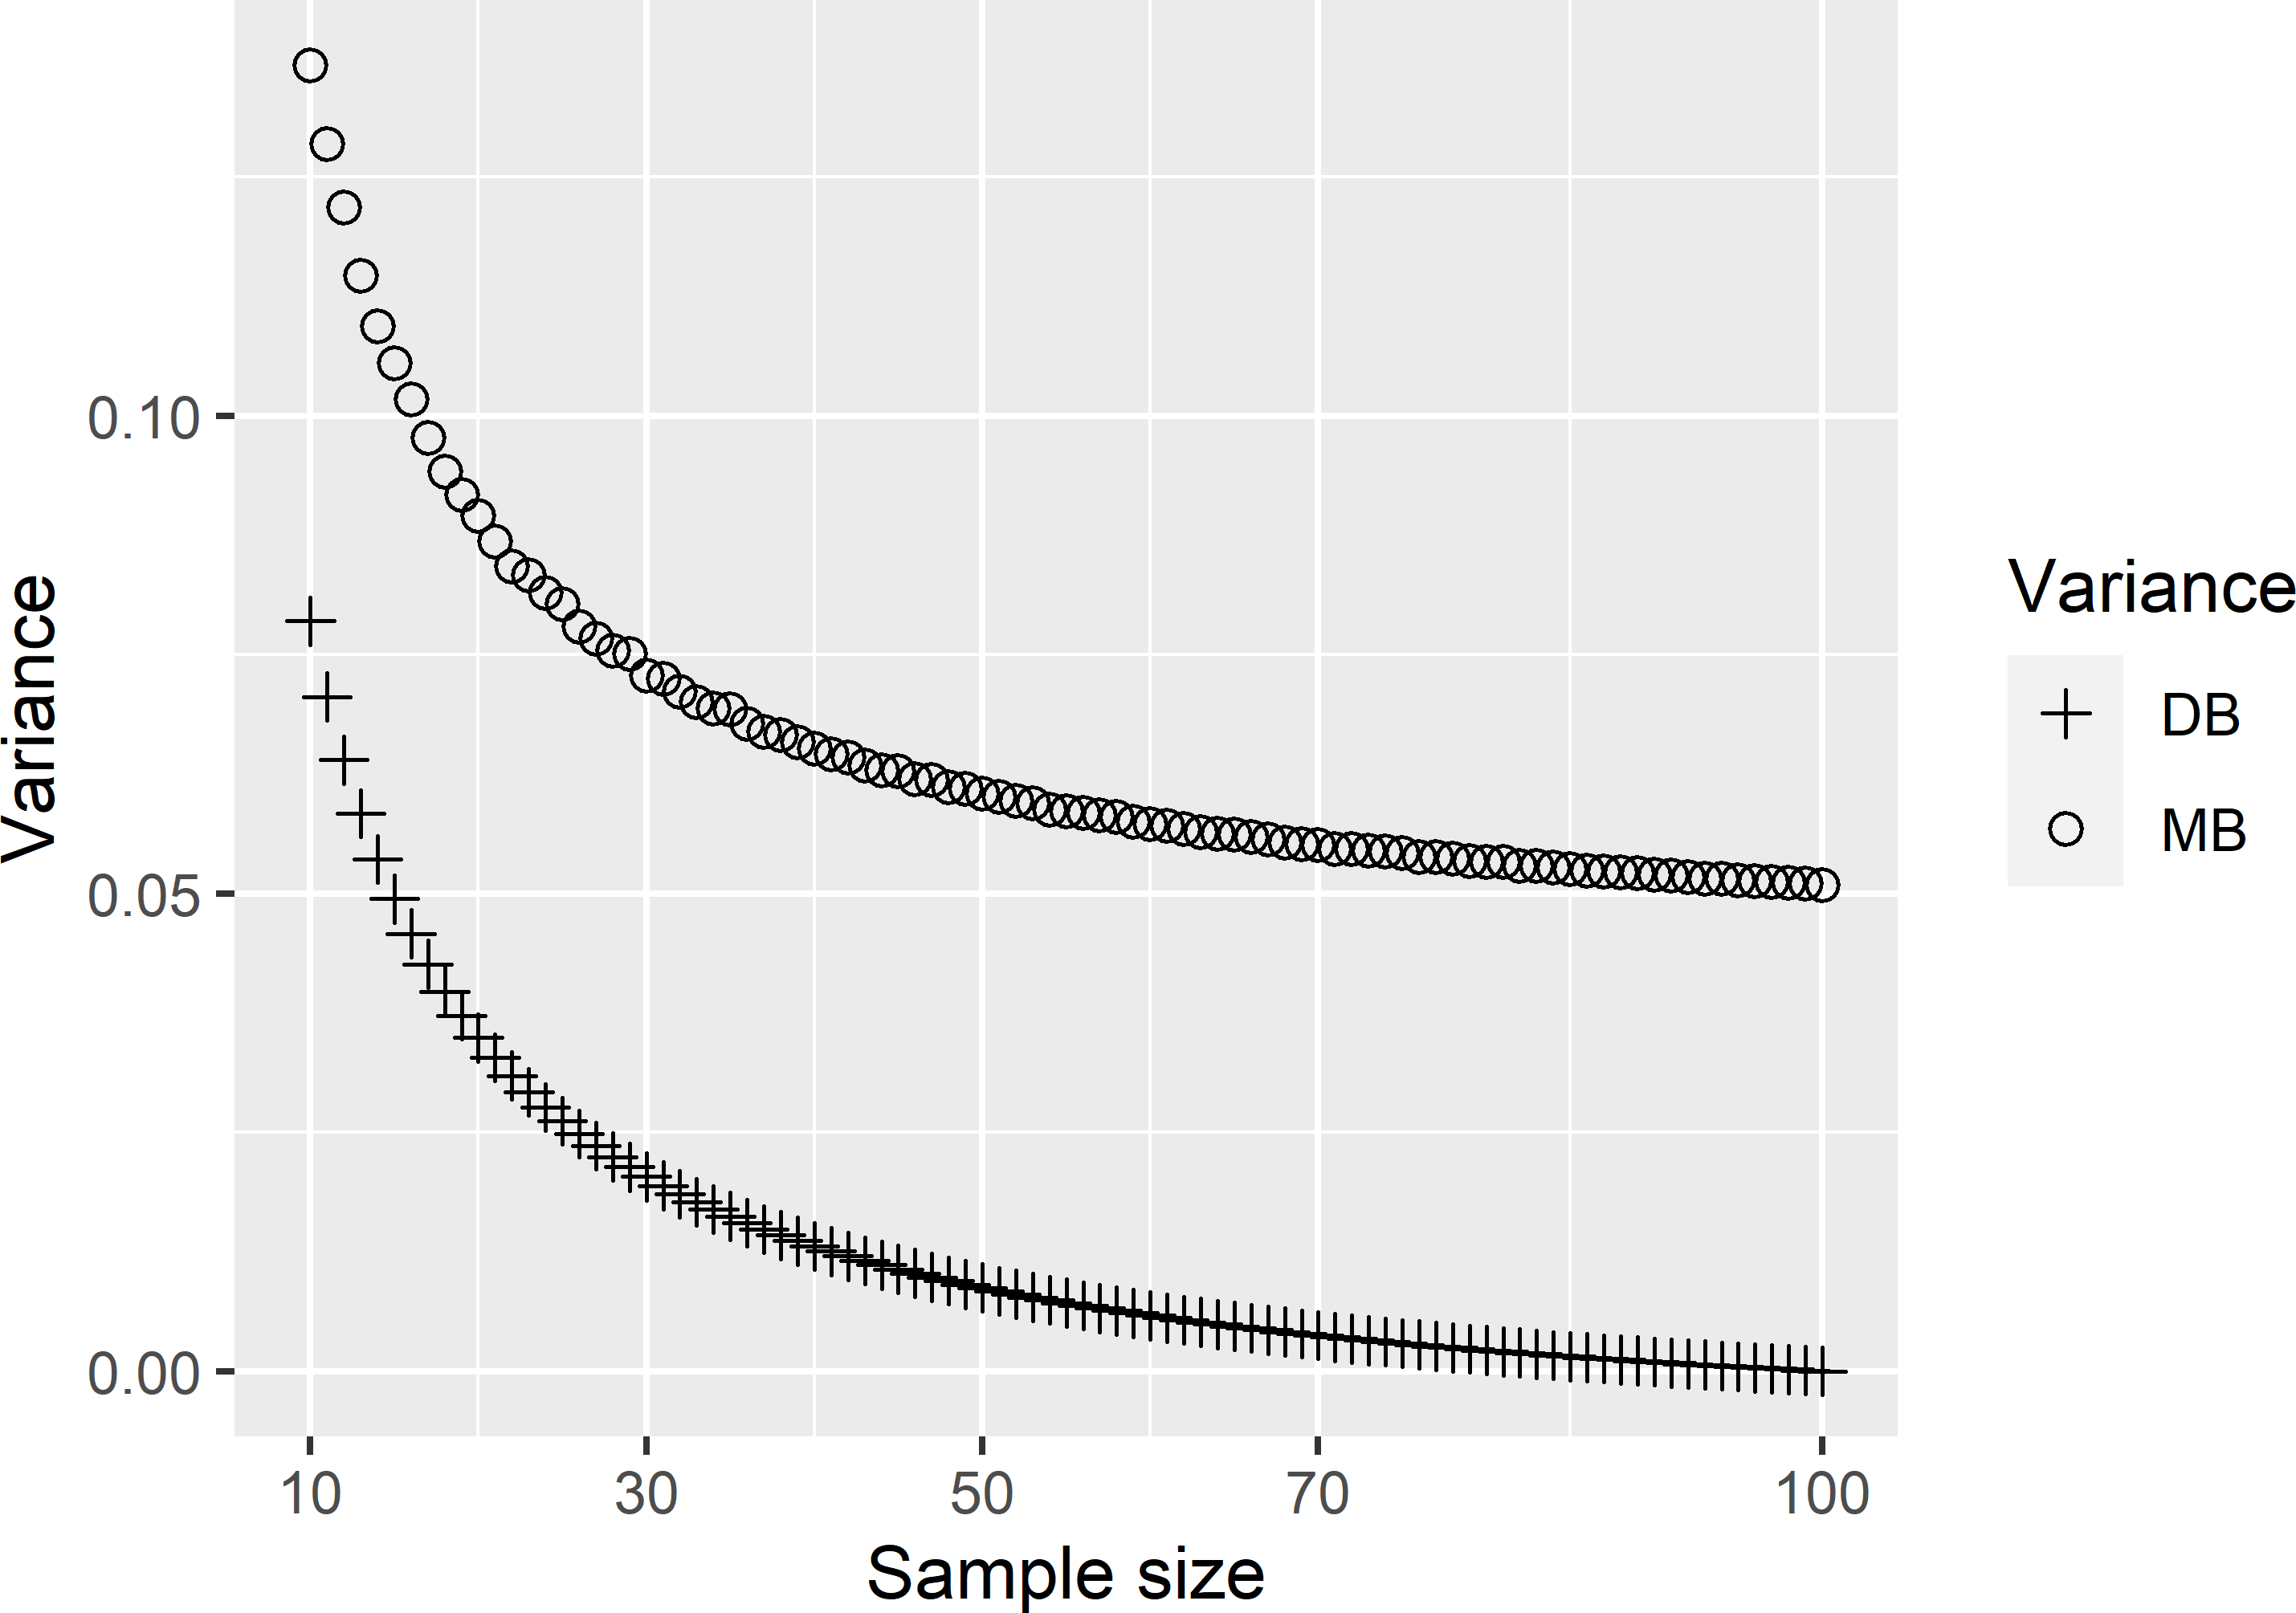 Model-variance (MB) and design-variance (DB) of the average of a simple random sample without replacement as a function of the sample size.